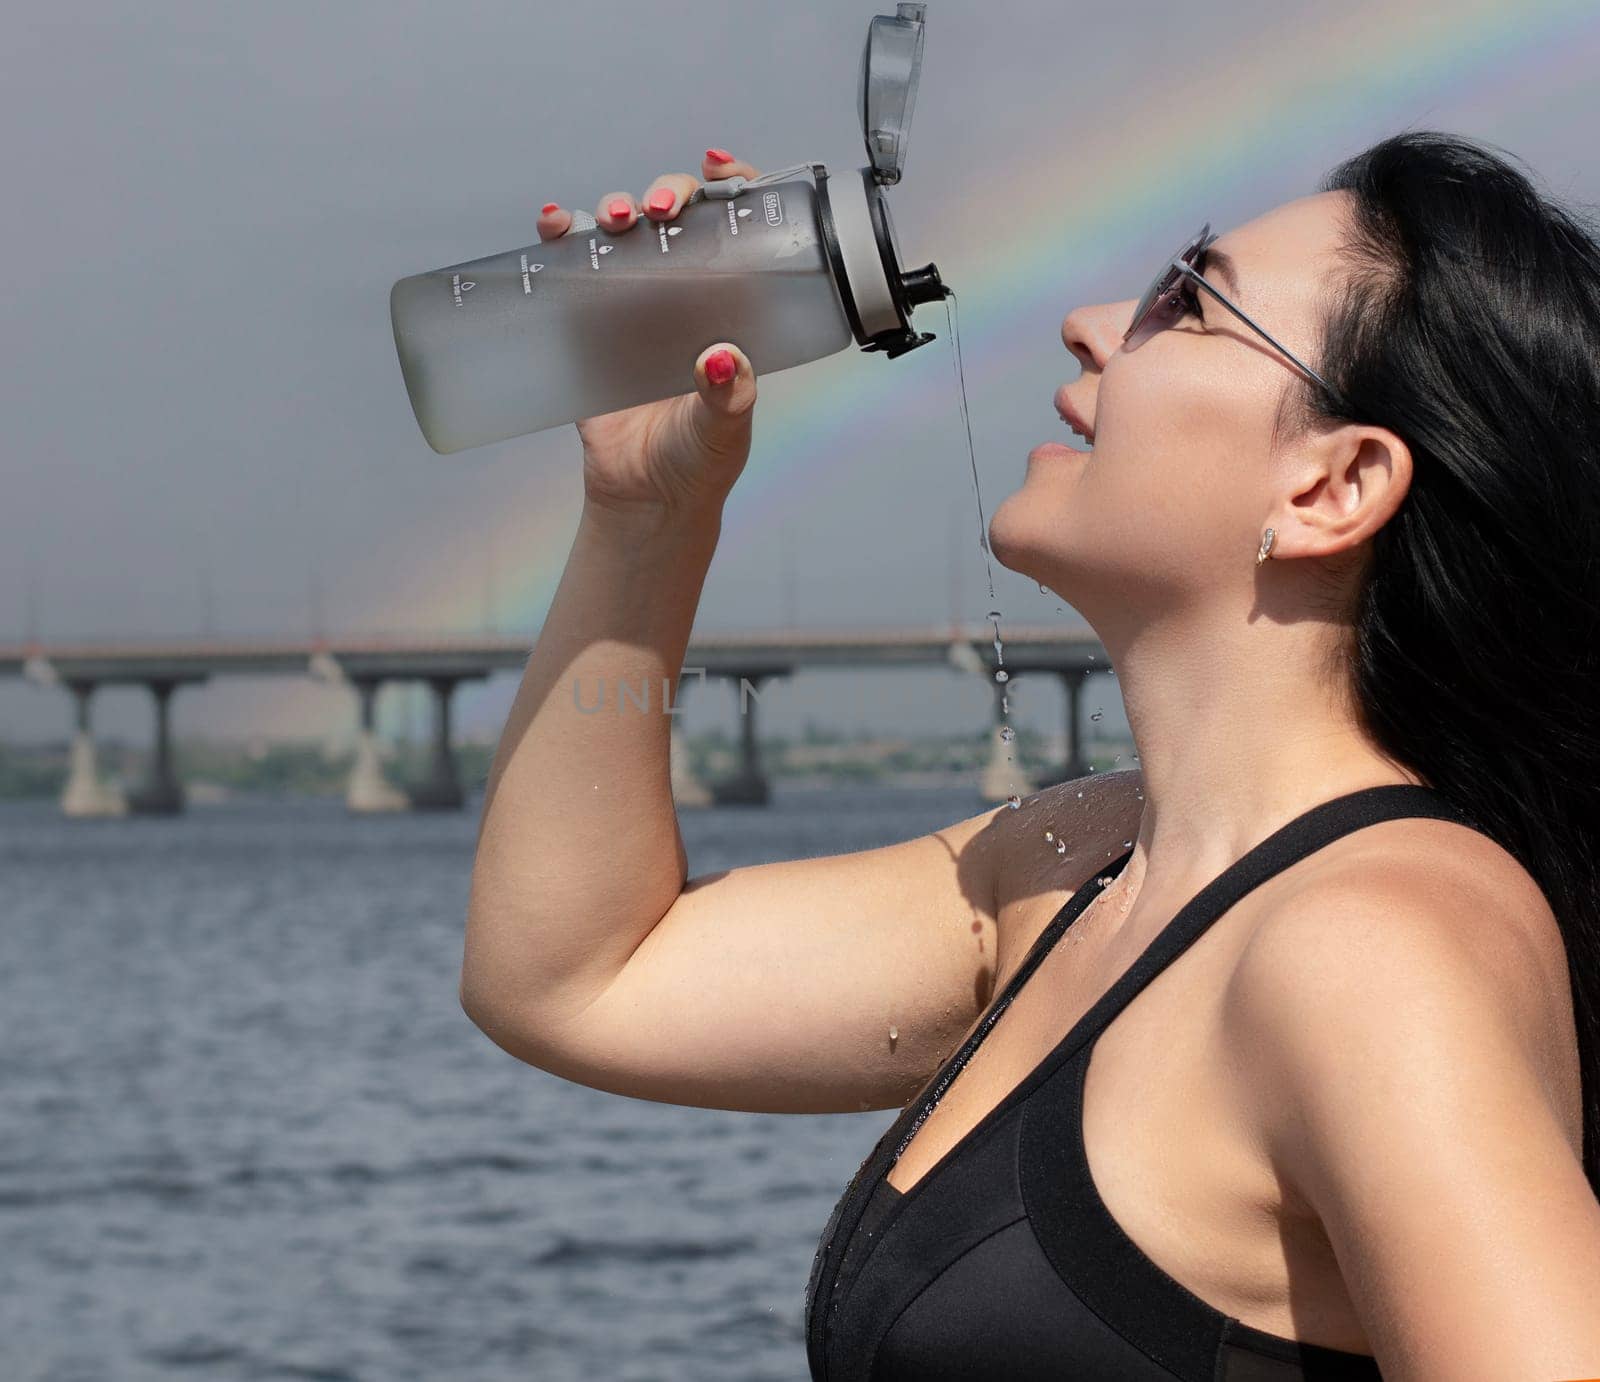 A beautiful and slender girl in sunglasses pours water over herself from a sports bottle after a fitness workout on the street in the summer, against the sky with a rainbow. Sport concept. Close-up.